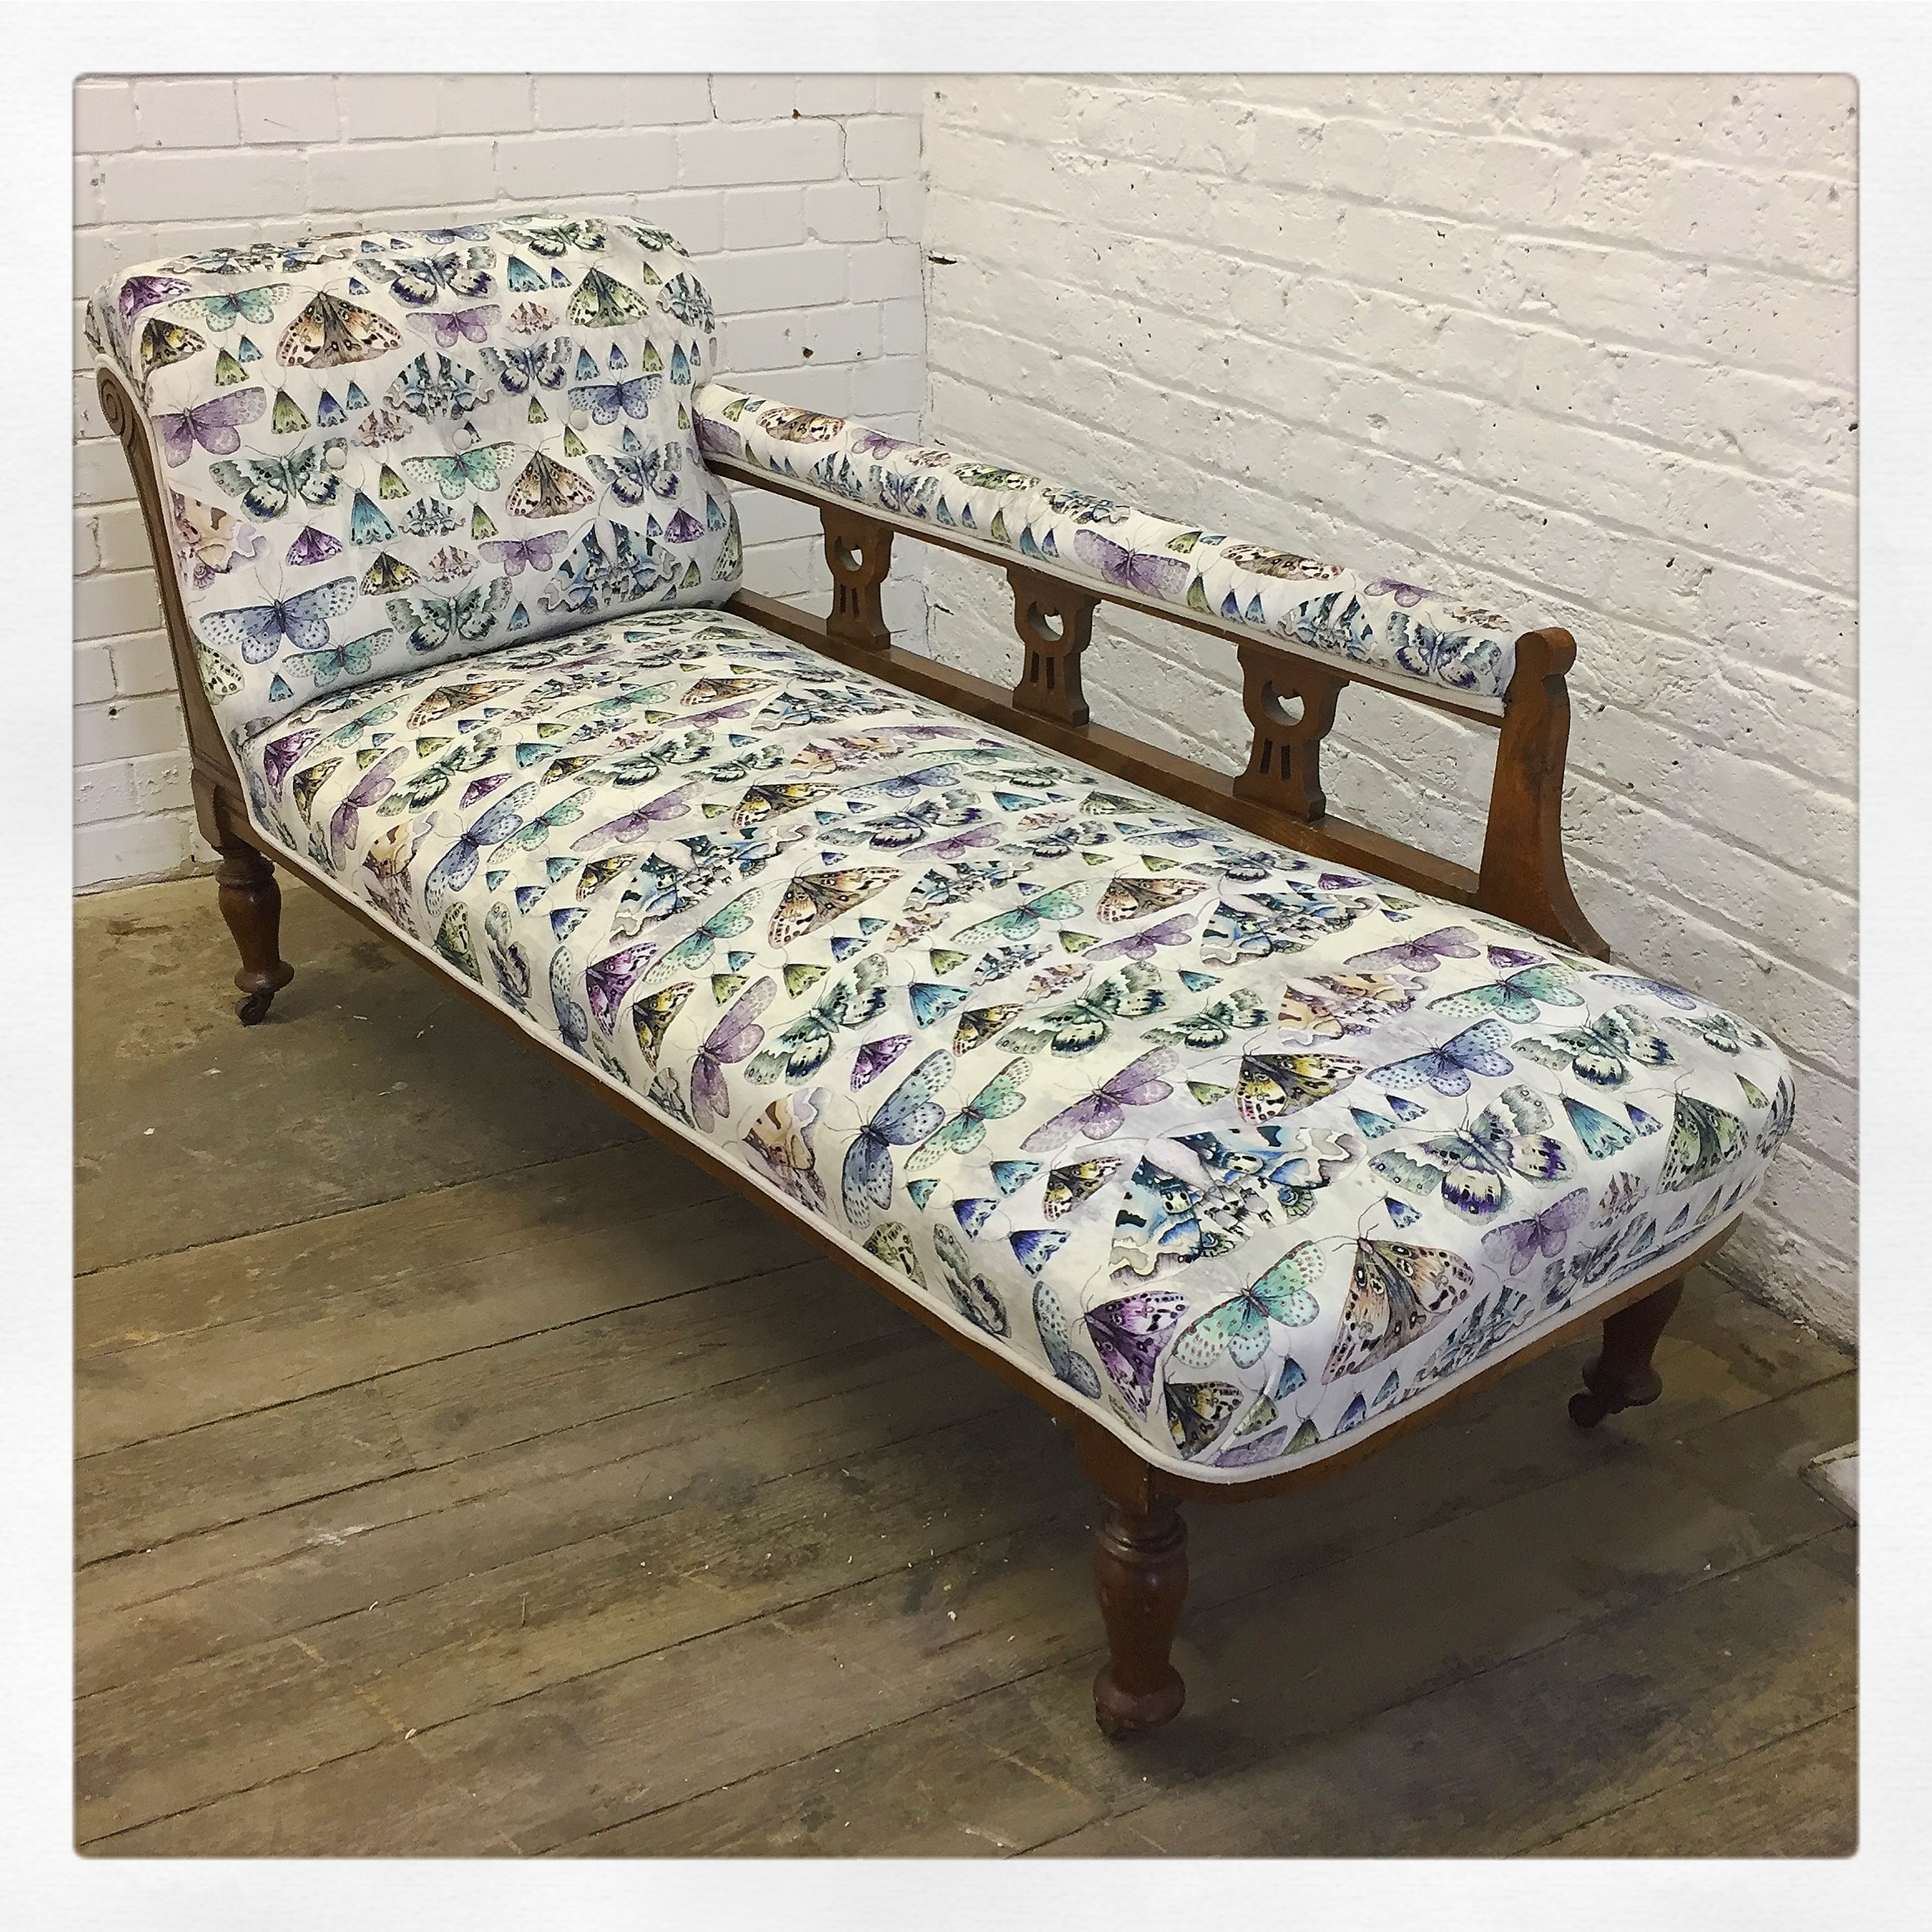 Chaise Longue Reupholstery in Butterfly Fabric